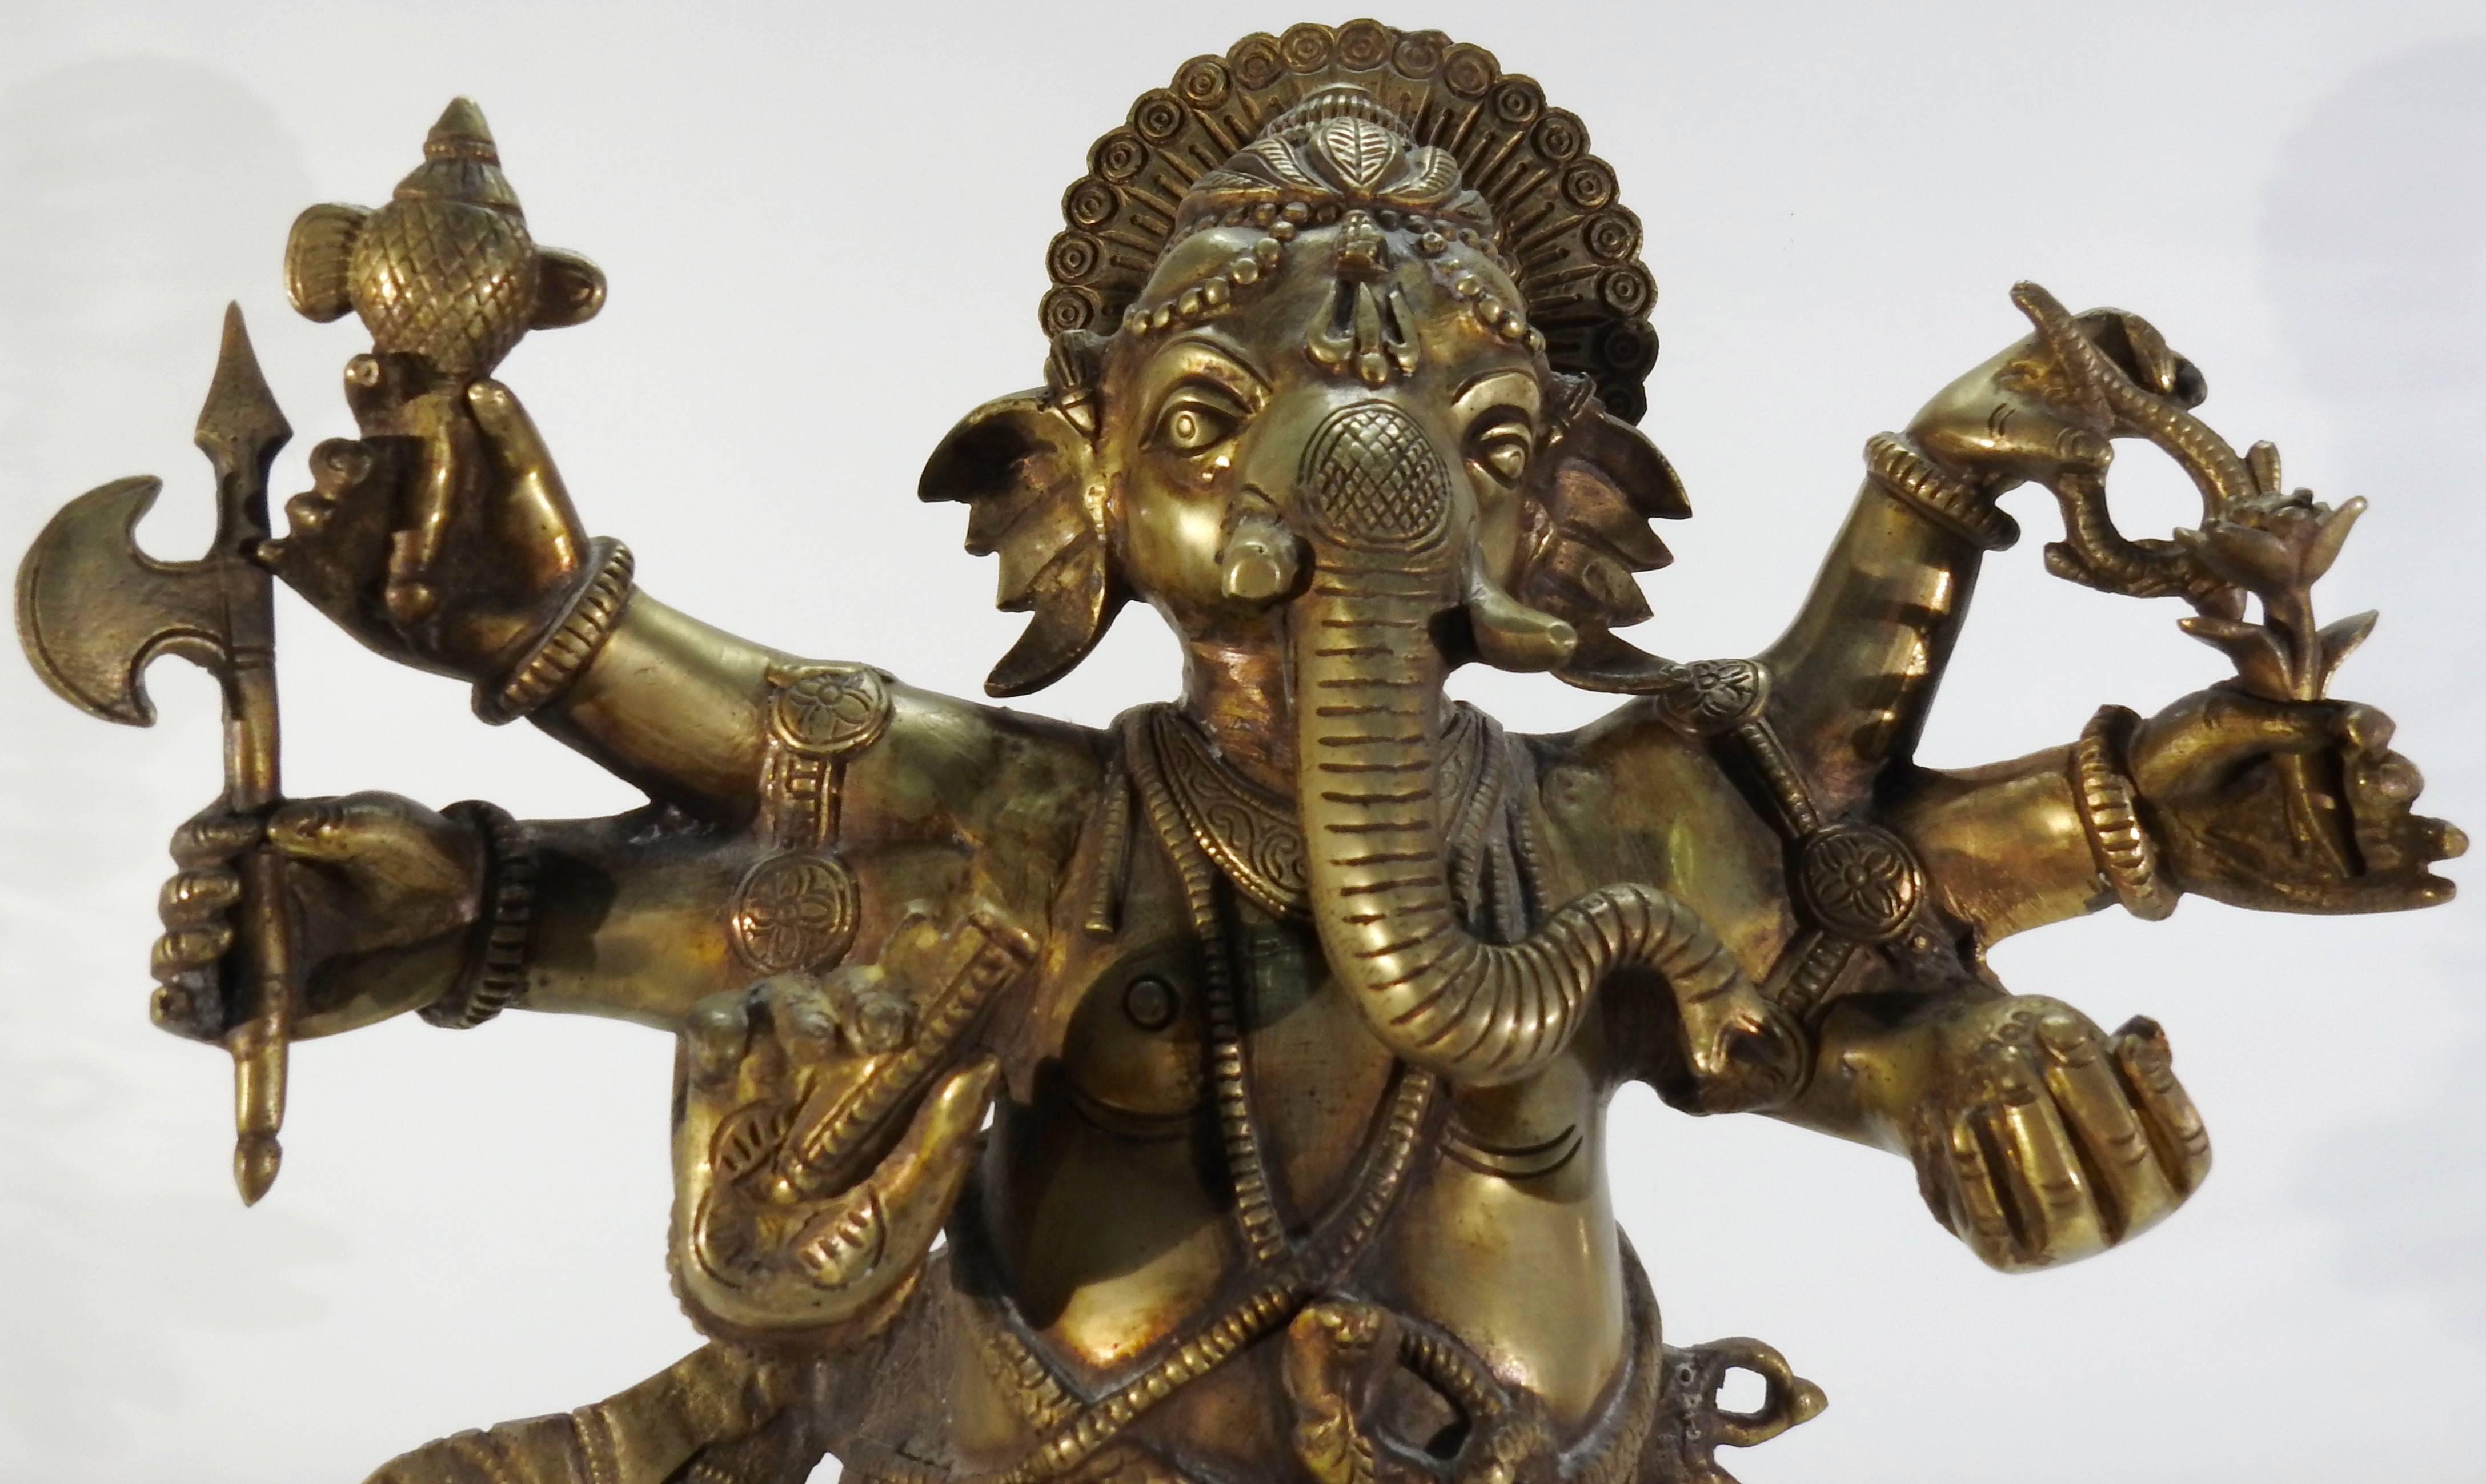 This is a stunning bronze statuette of Ganesha. This detailed statuette depicts Ganesha, the Hindu god of success dancing, with a rat at his feet. He symbolizes all-pervasiveness. He is elaborately dressed and holding a unique treasure in each of